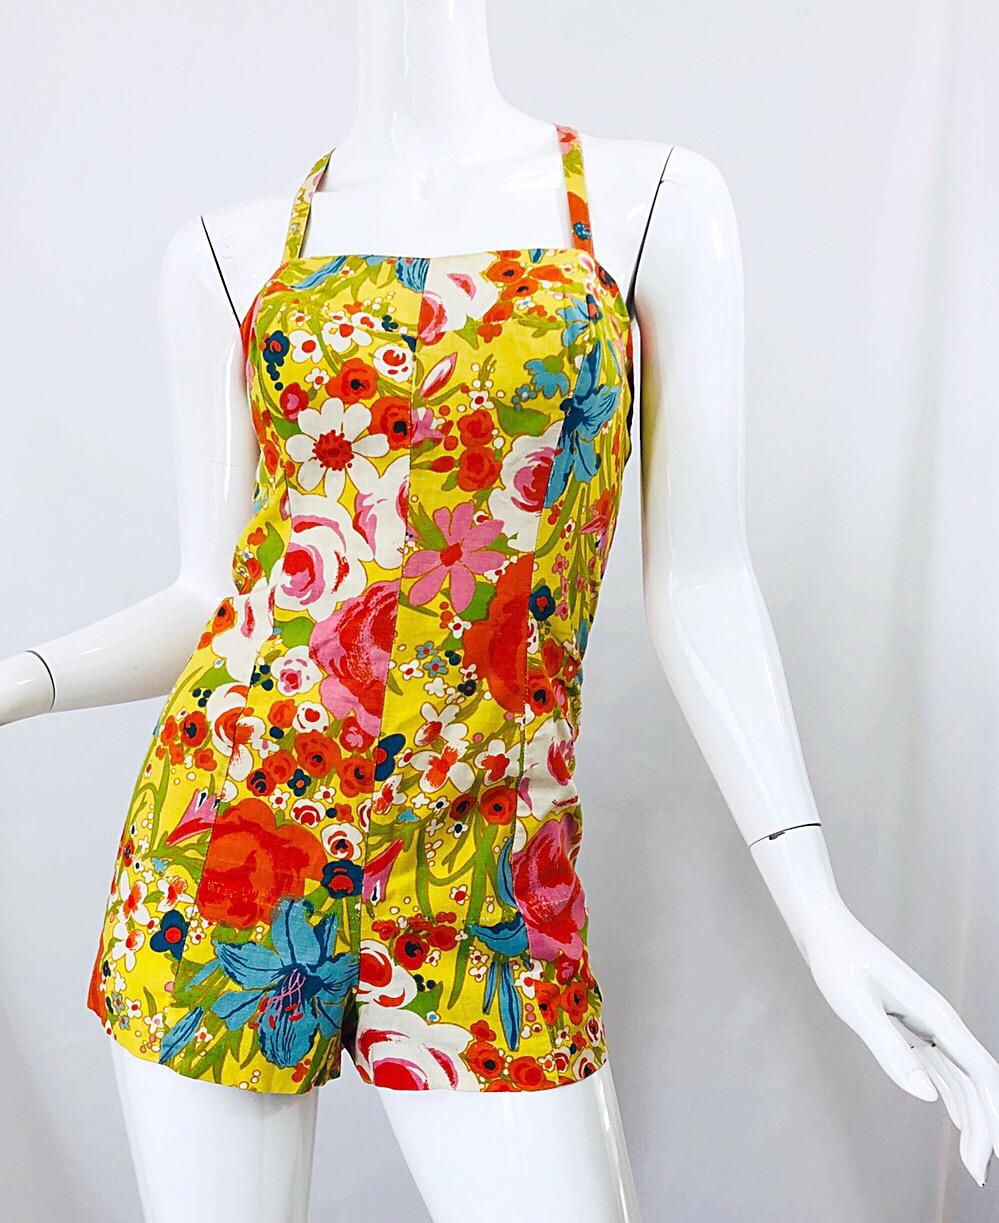 1960s Tina Leser Mod One Piece Vintage Playsuit Romper 60s Swimsuit Flowers For Sale 1